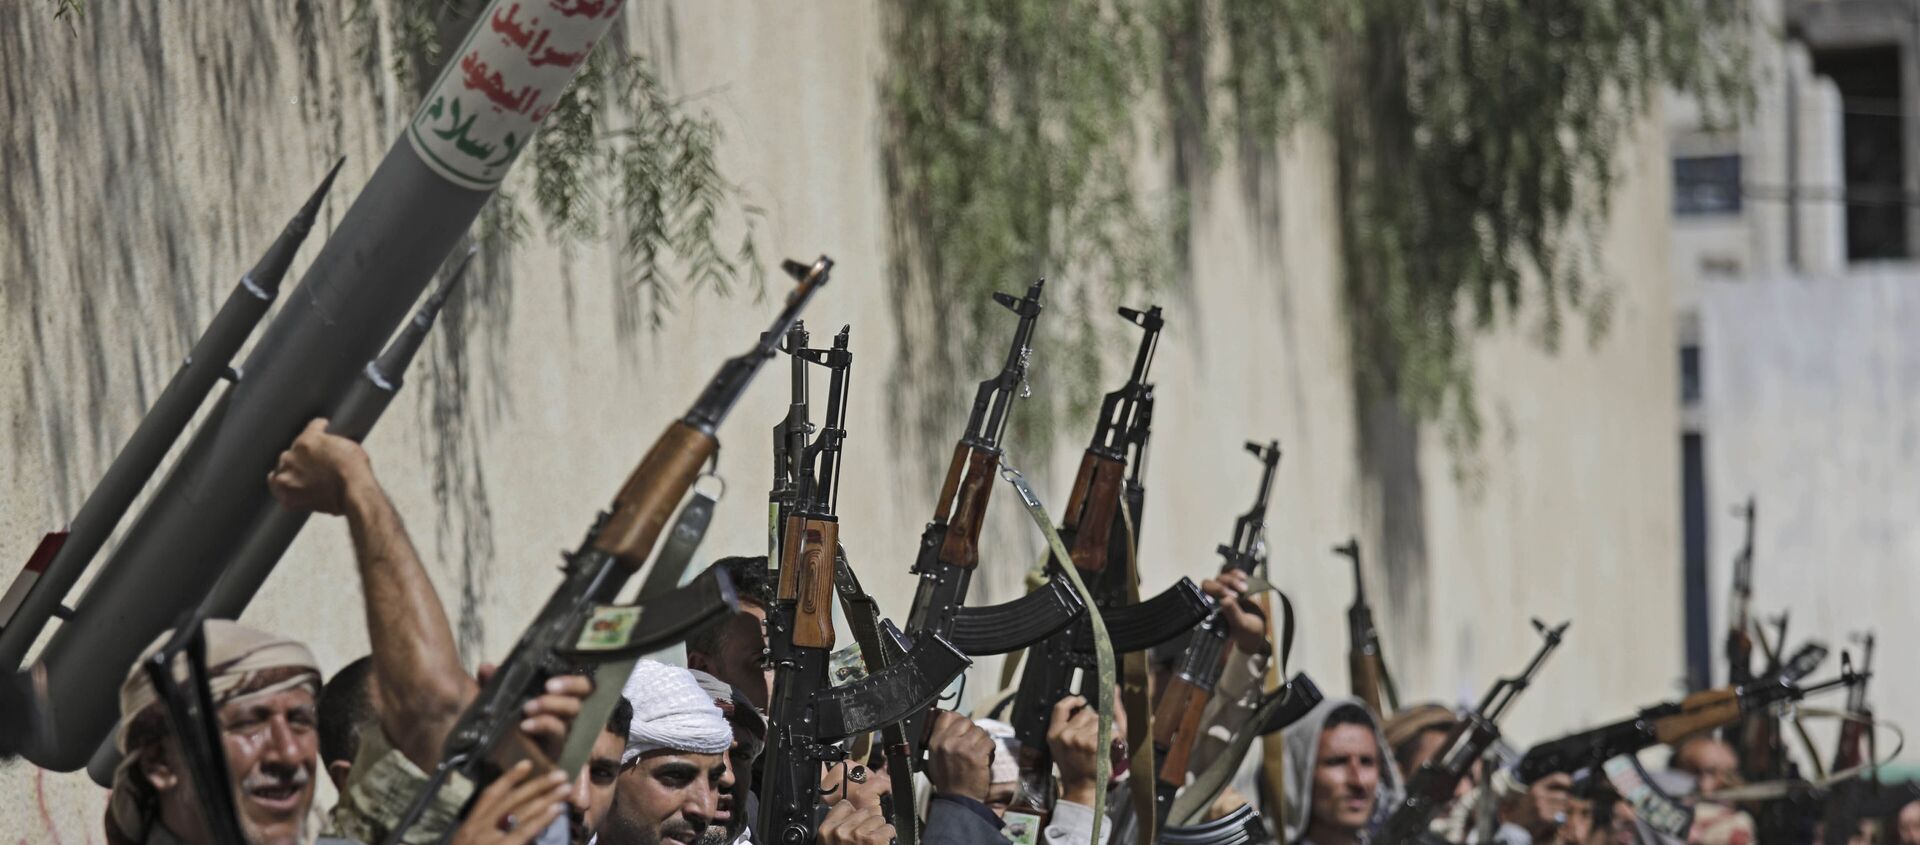 Tribesmen loyal to Houthi rebel raise their weapons during a gathering aimed at mobilizing more fighters for the Houthi movement, in Sanaa, Yemen. File photo. - Sputnik International, 1920, 03.06.2021